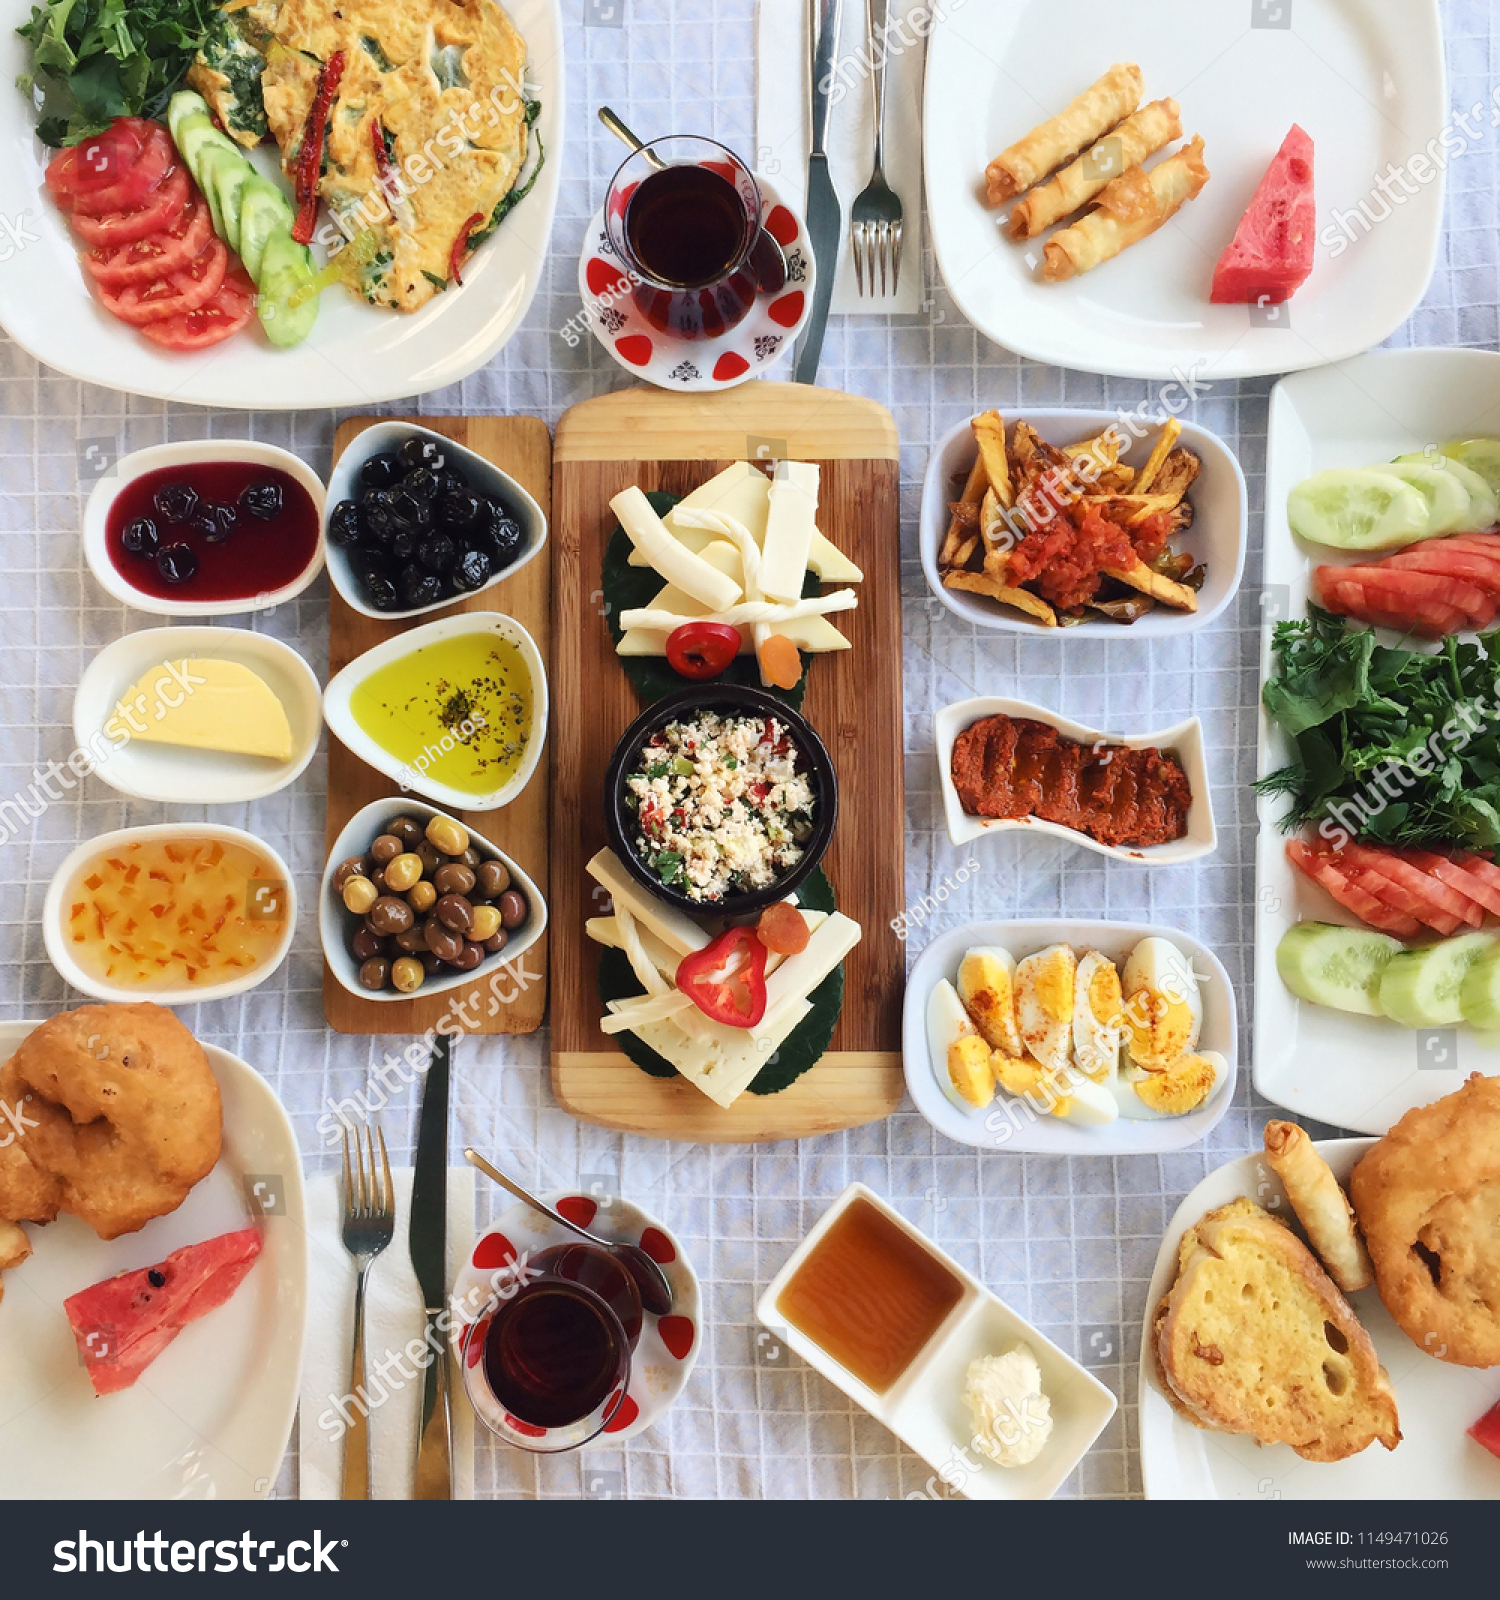 Breakfasts are usually rich in Turkish cuisine and include a lot of varieties; here in the photo there is butter, green and black olives, different jams, honey, cheese varieties, boiled eggs etc #1149471026